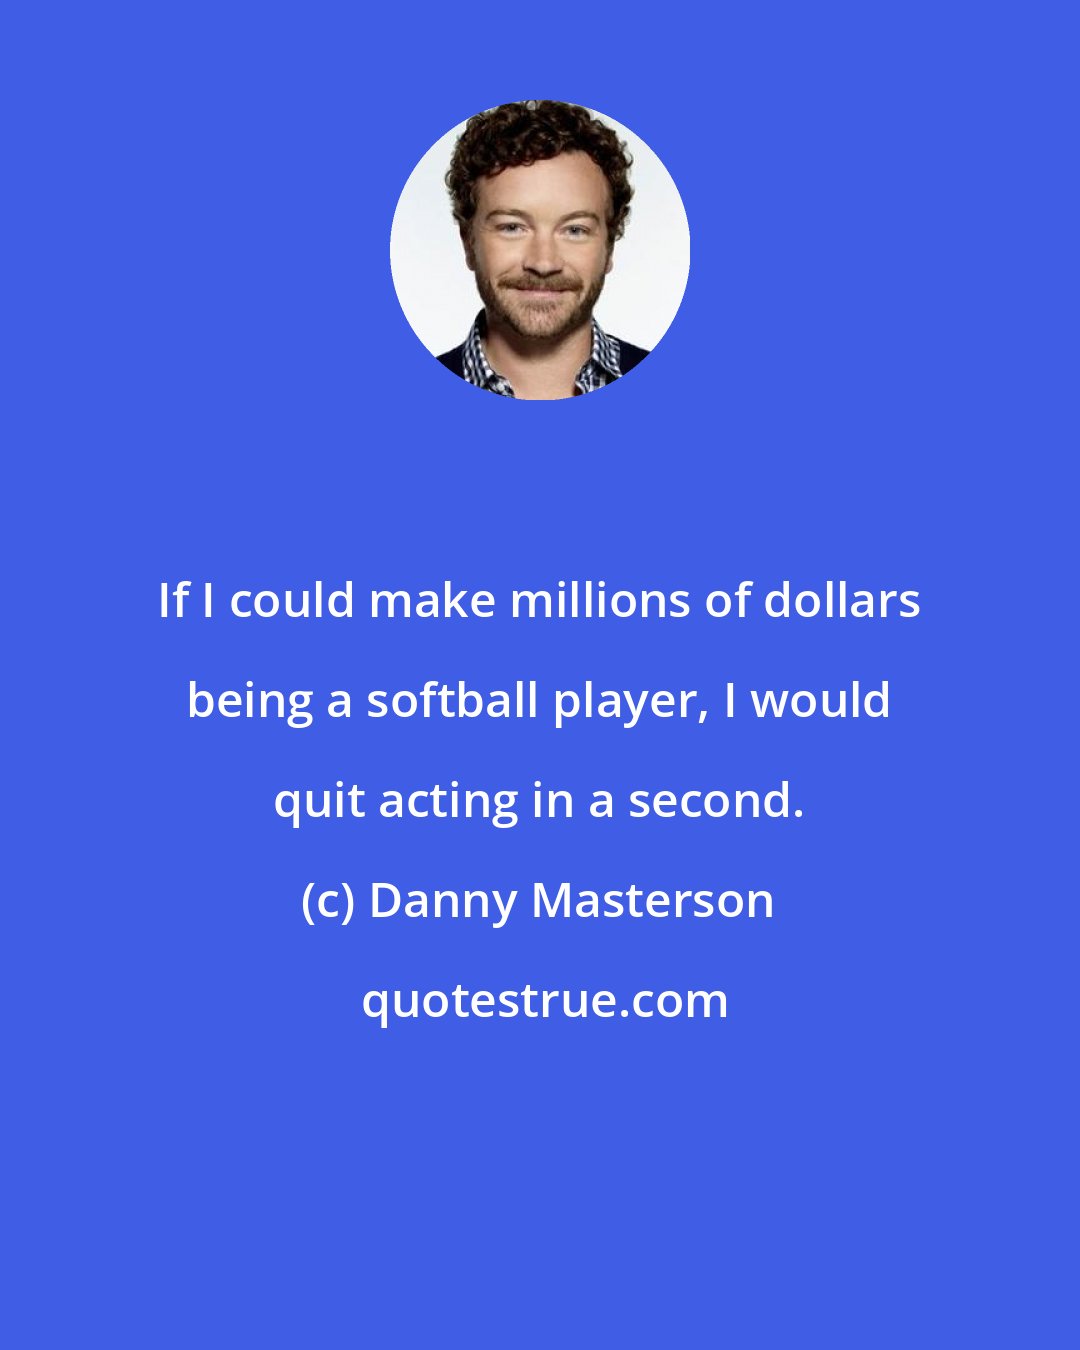 Danny Masterson: If I could make millions of dollars being a softball player, I would quit acting in a second.